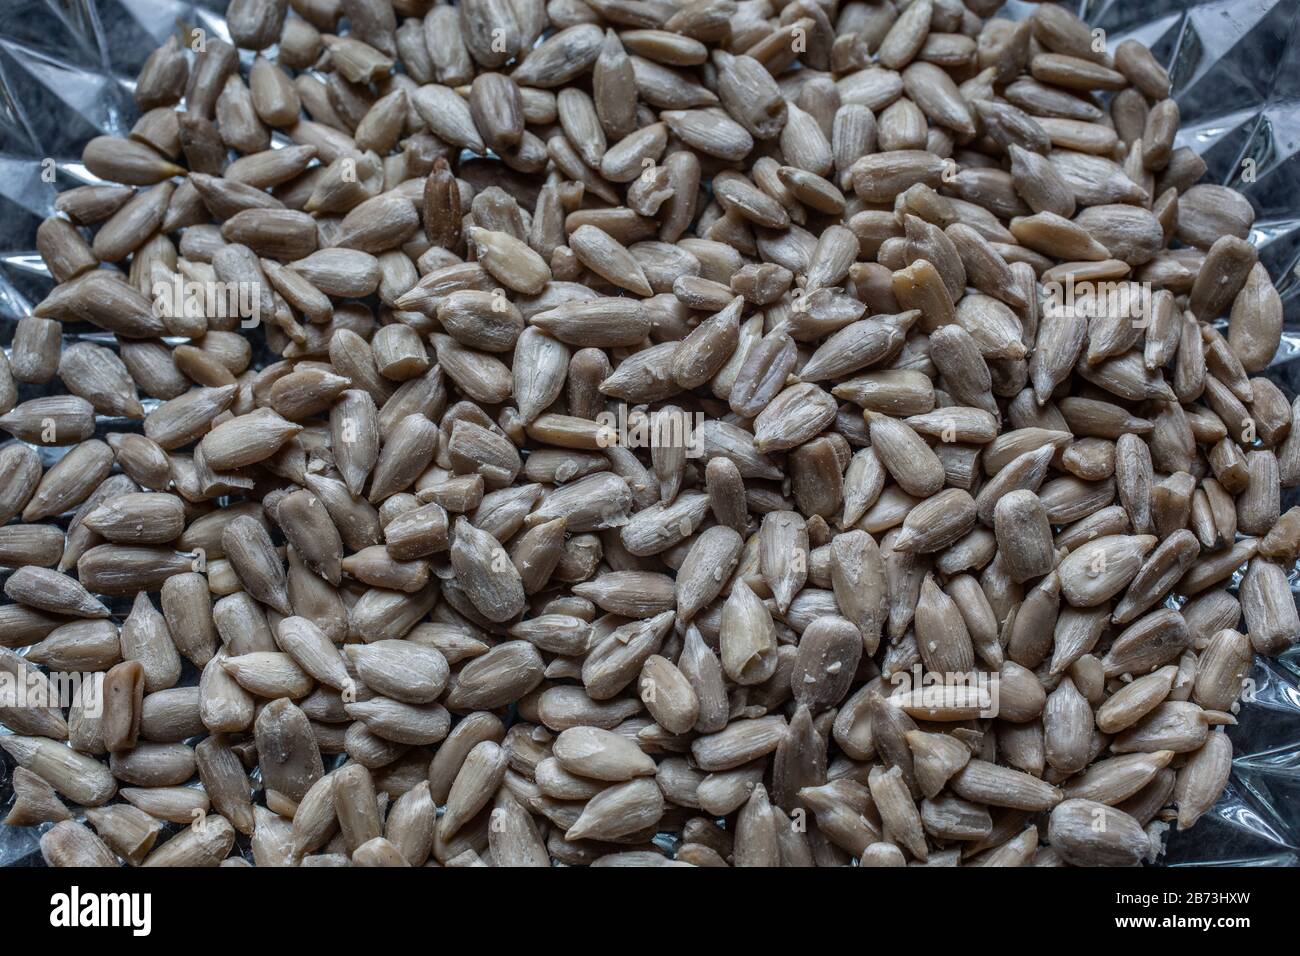 A pile of sunflower seeds as bird feed Stock Photo